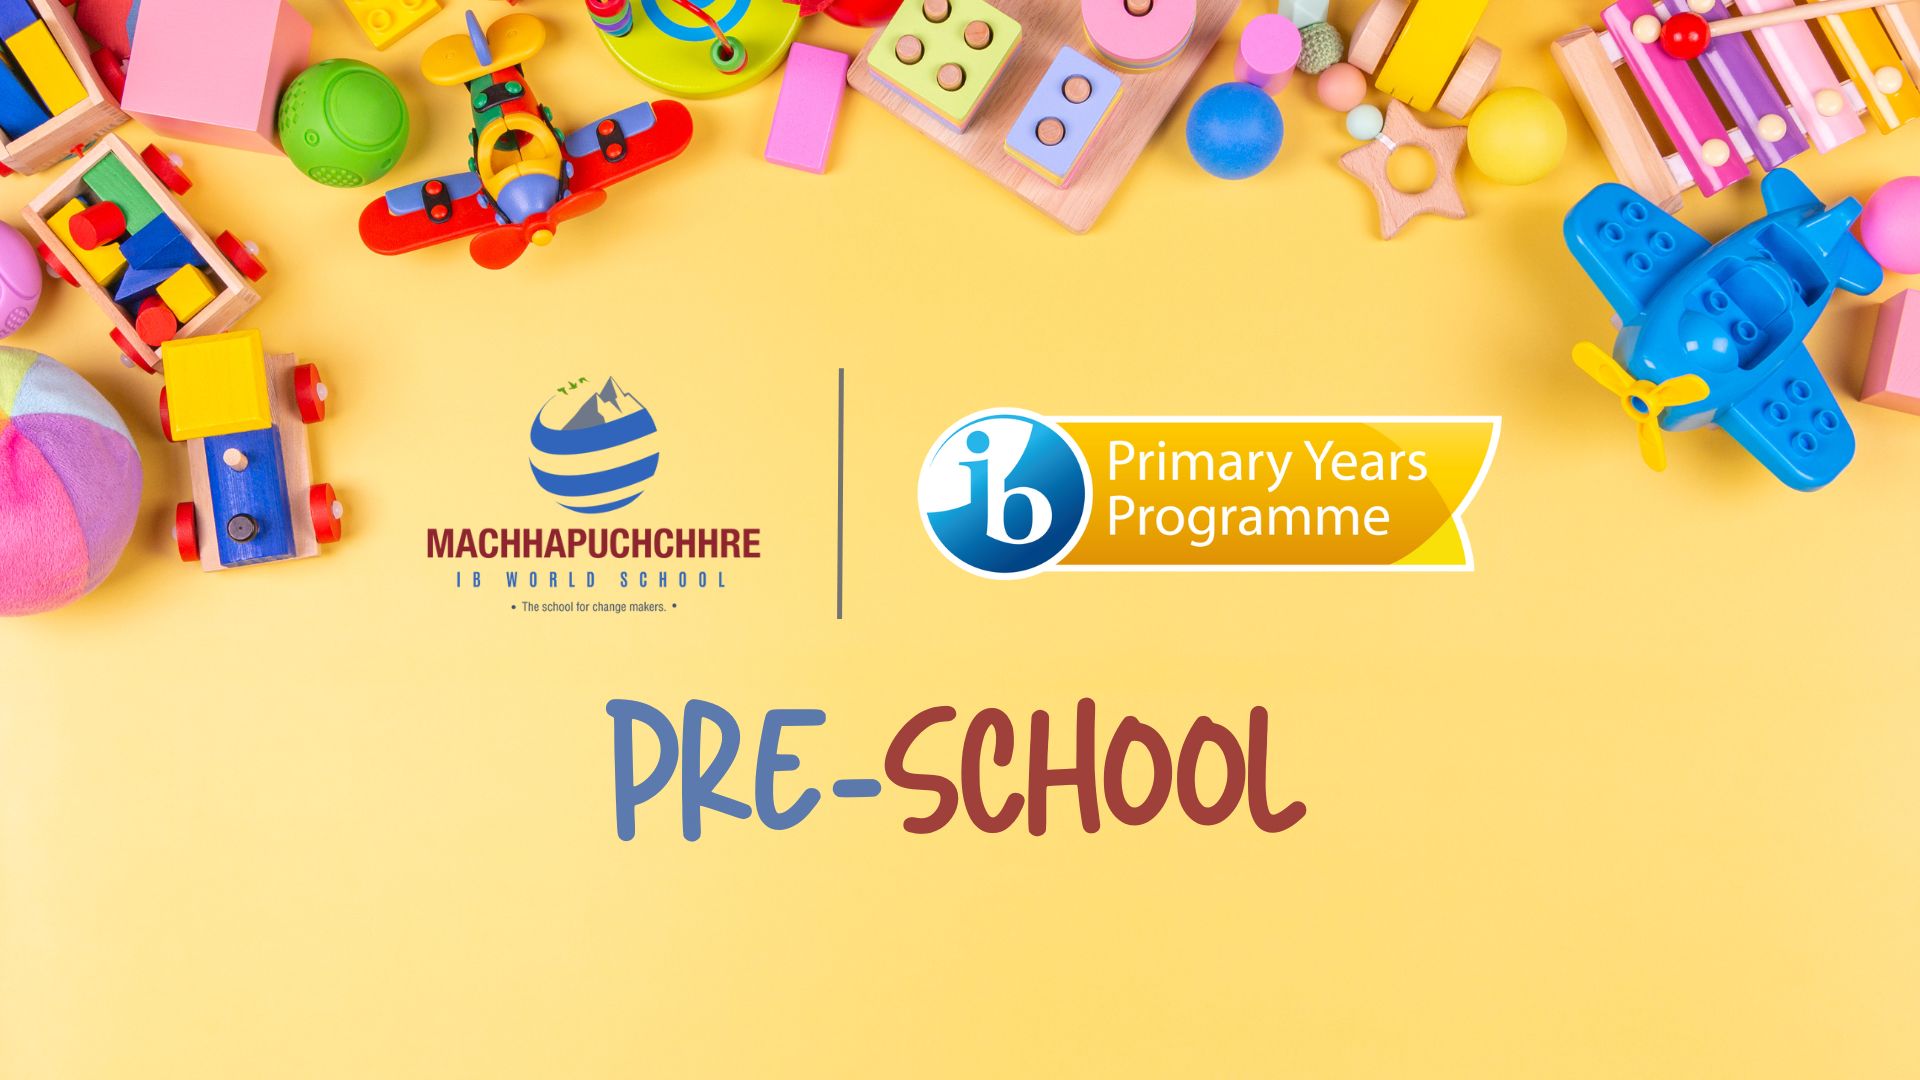 Nurturing Young Minds: Exploring the IB Early Years Programme (EYP) at Machhapuchchhre IB World School